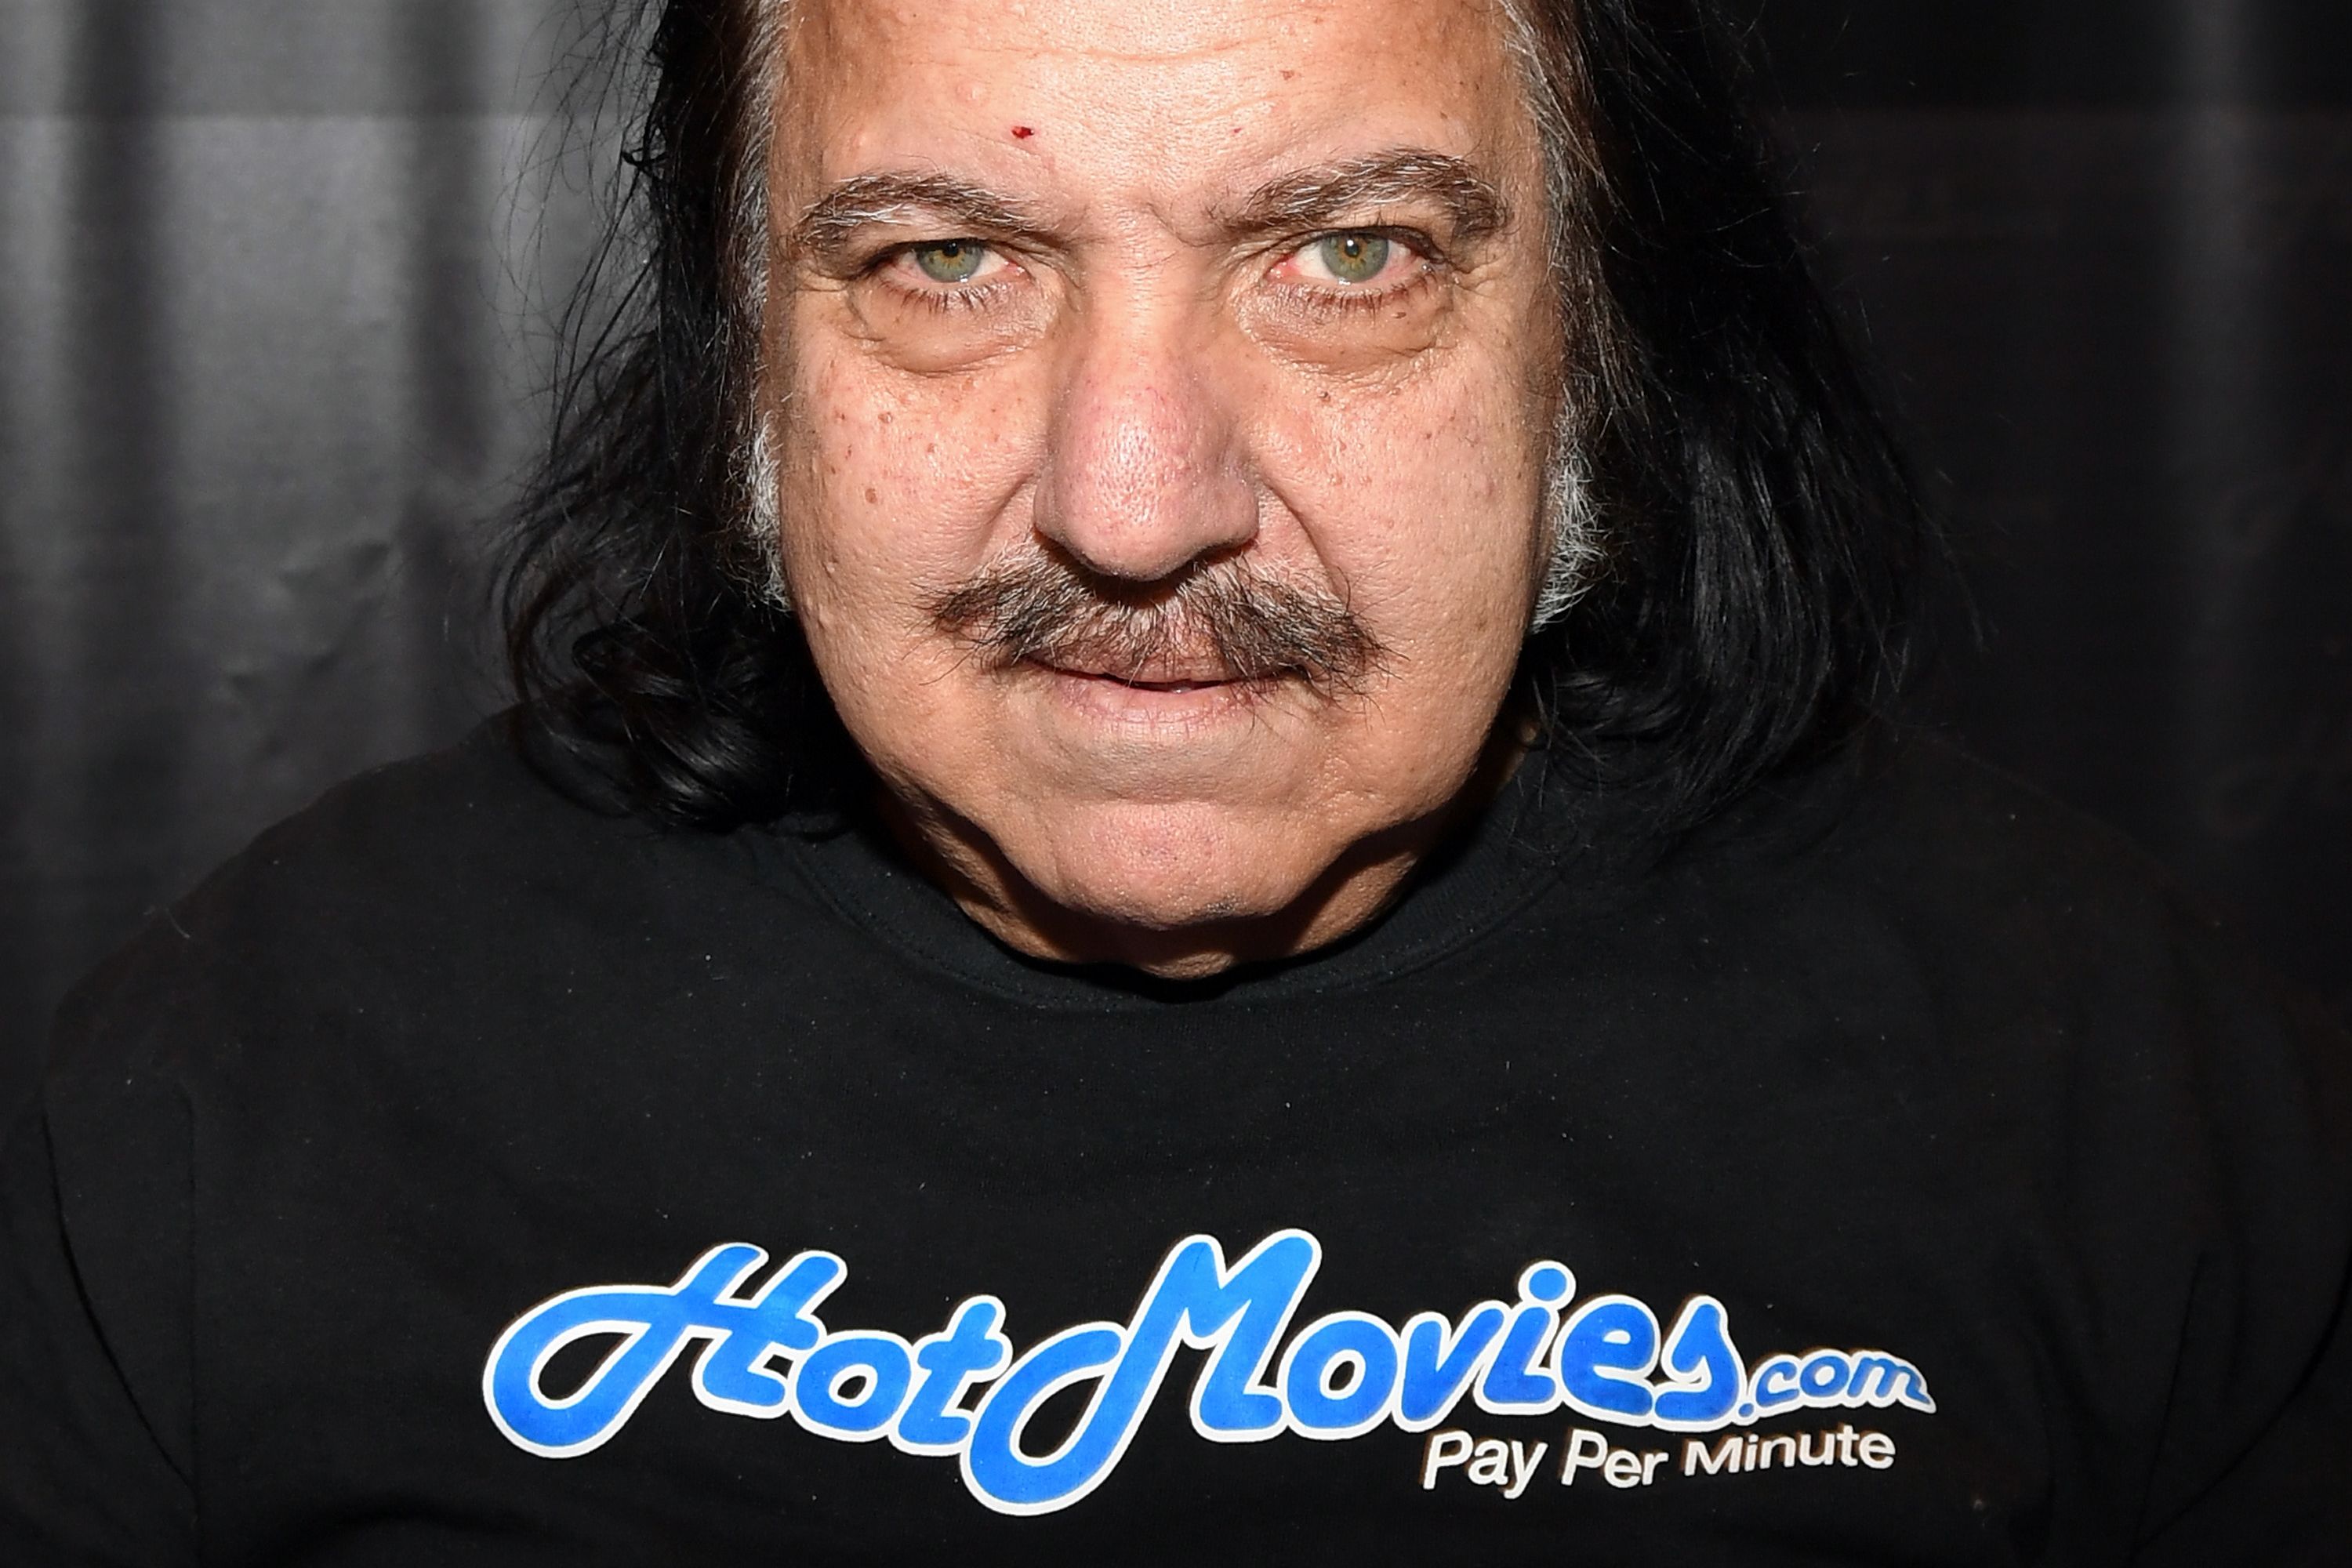 Xxx Sex Sleeping Rep Video - Porn star Ron Jeremy faces 20 more sexual assault charges | CNN